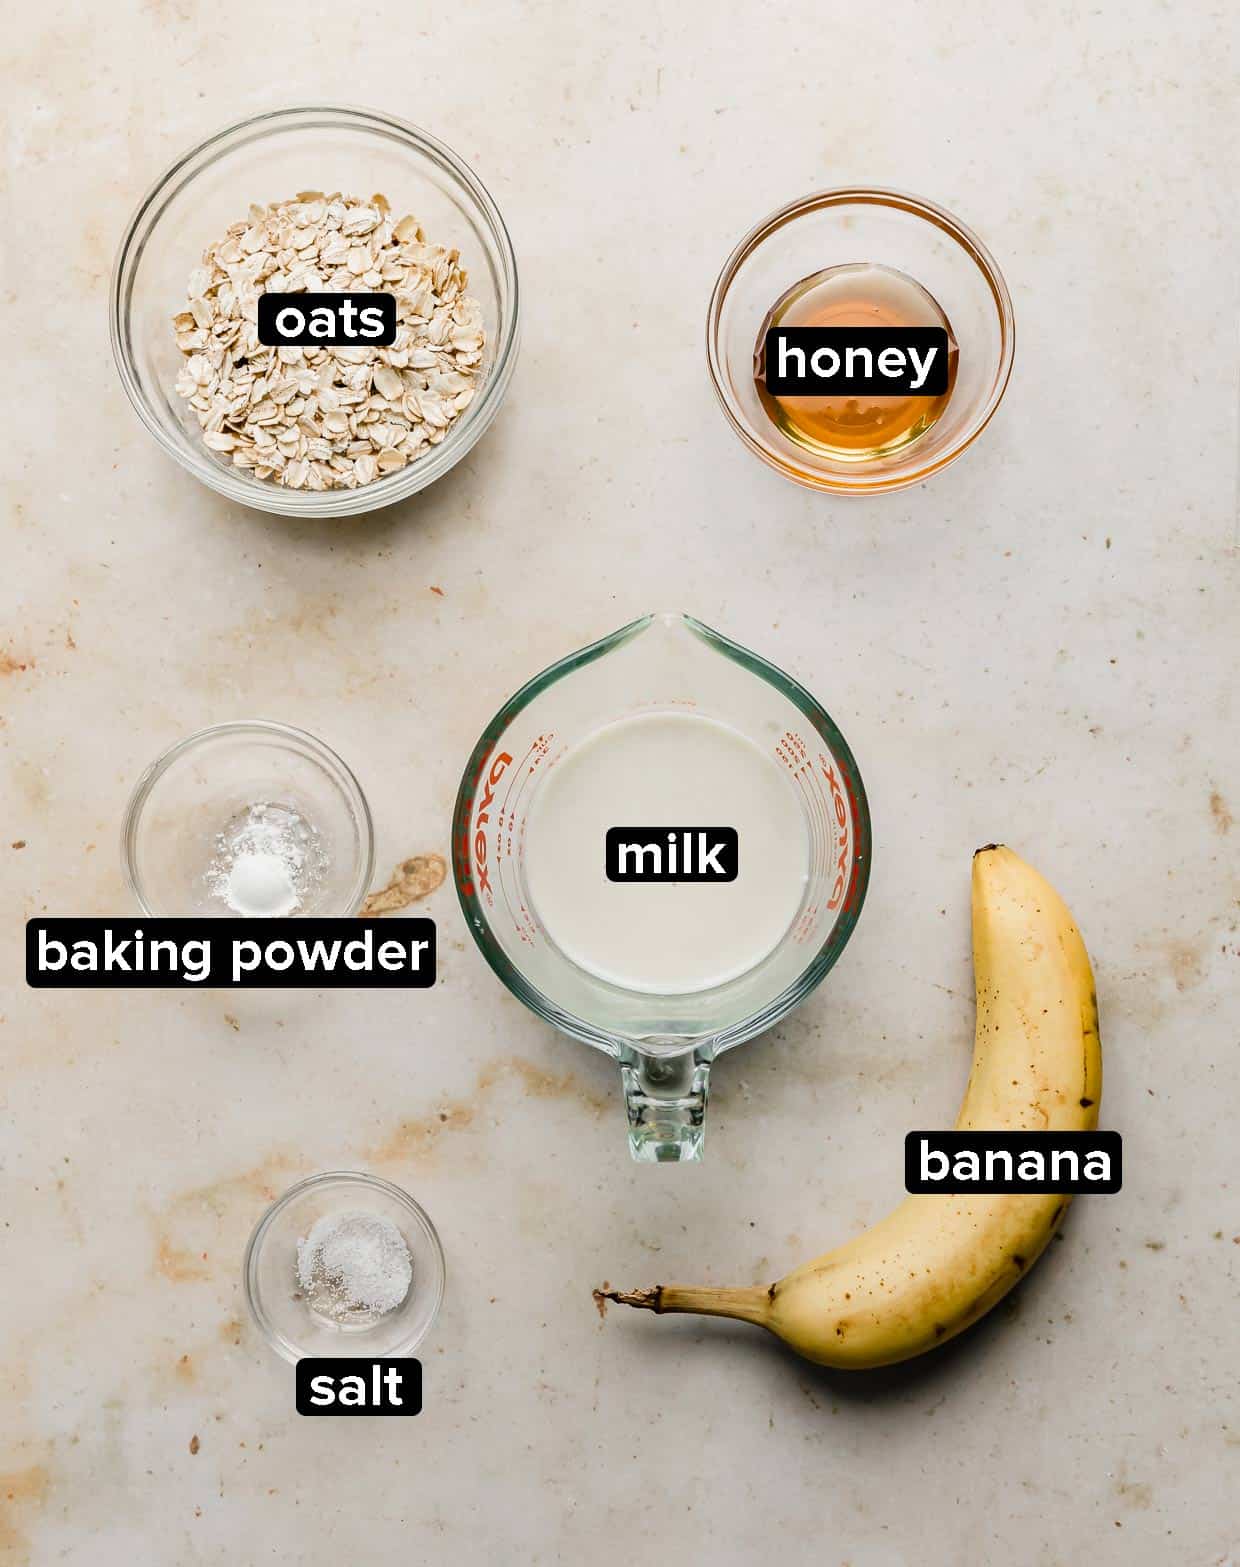 Ingredients used to make Baked Oats on a cream background.